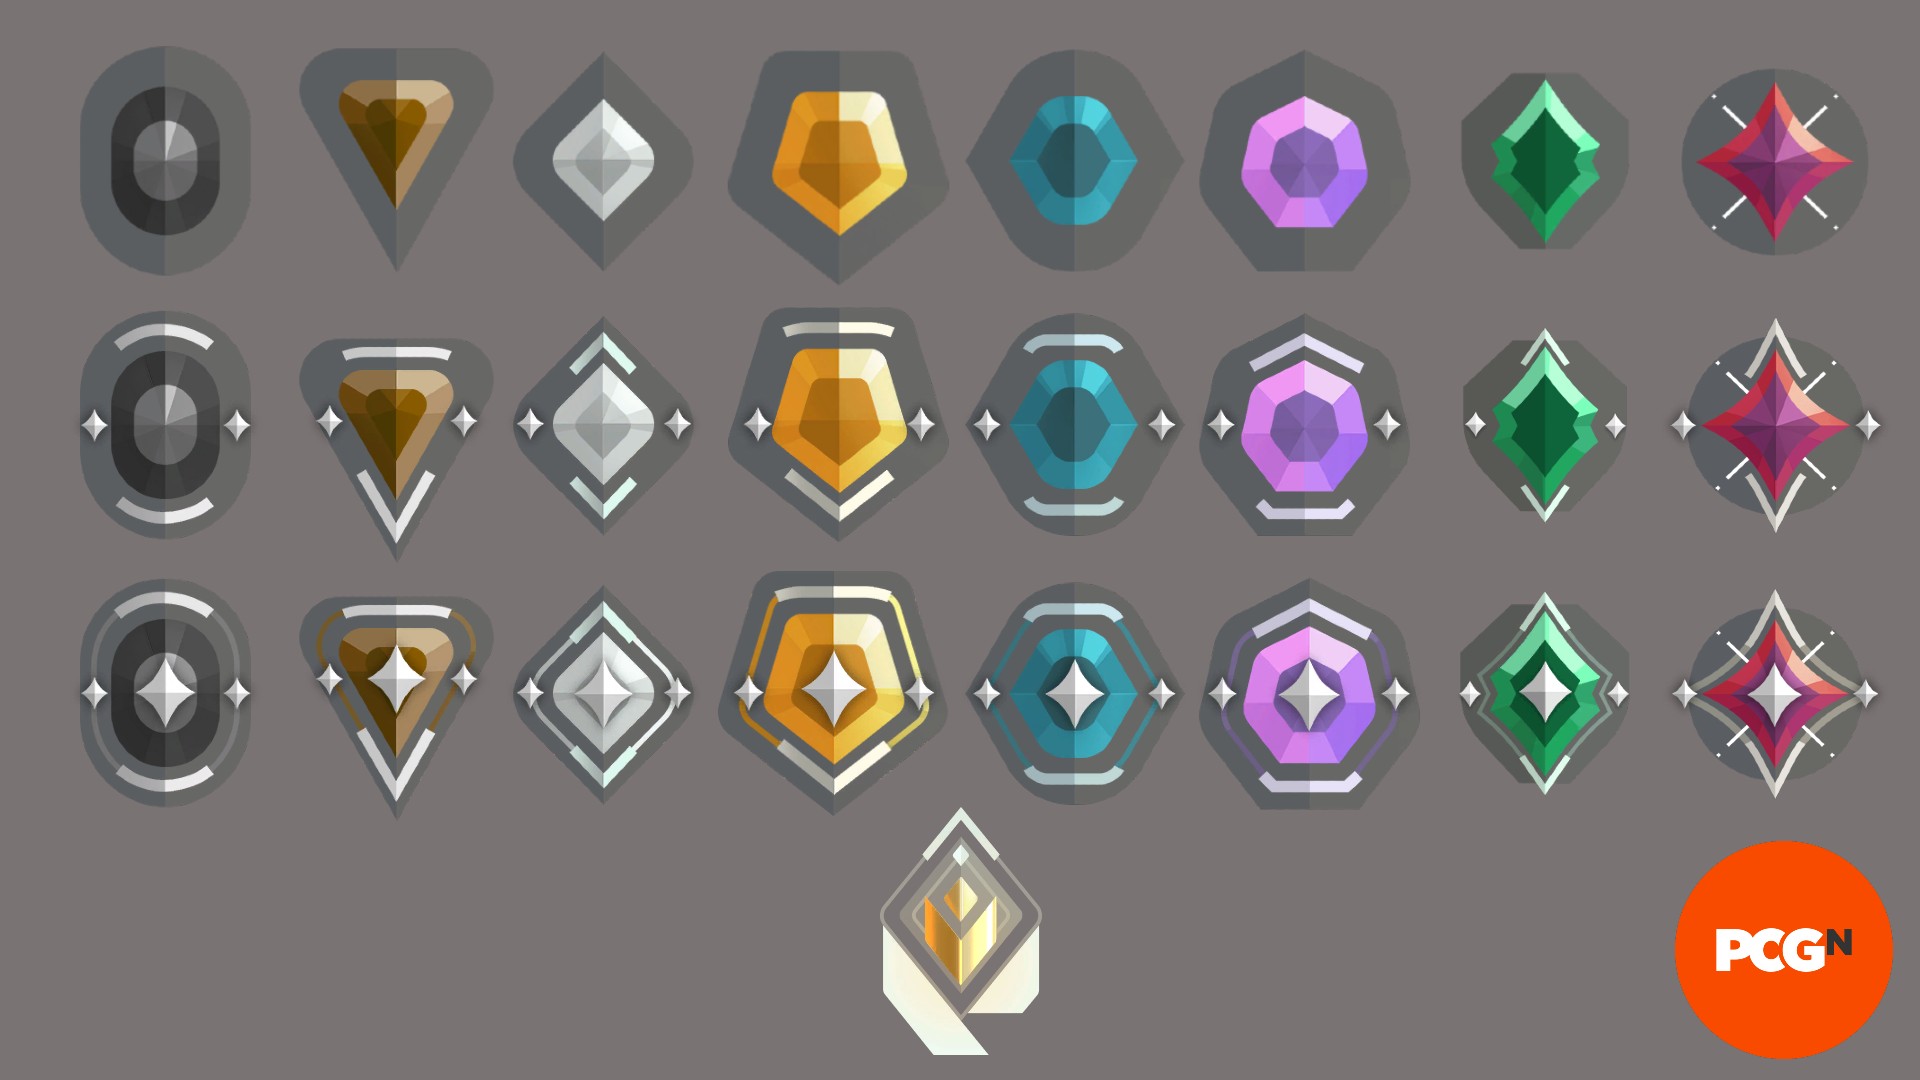 An image with all of the valorant rank icons available in the game